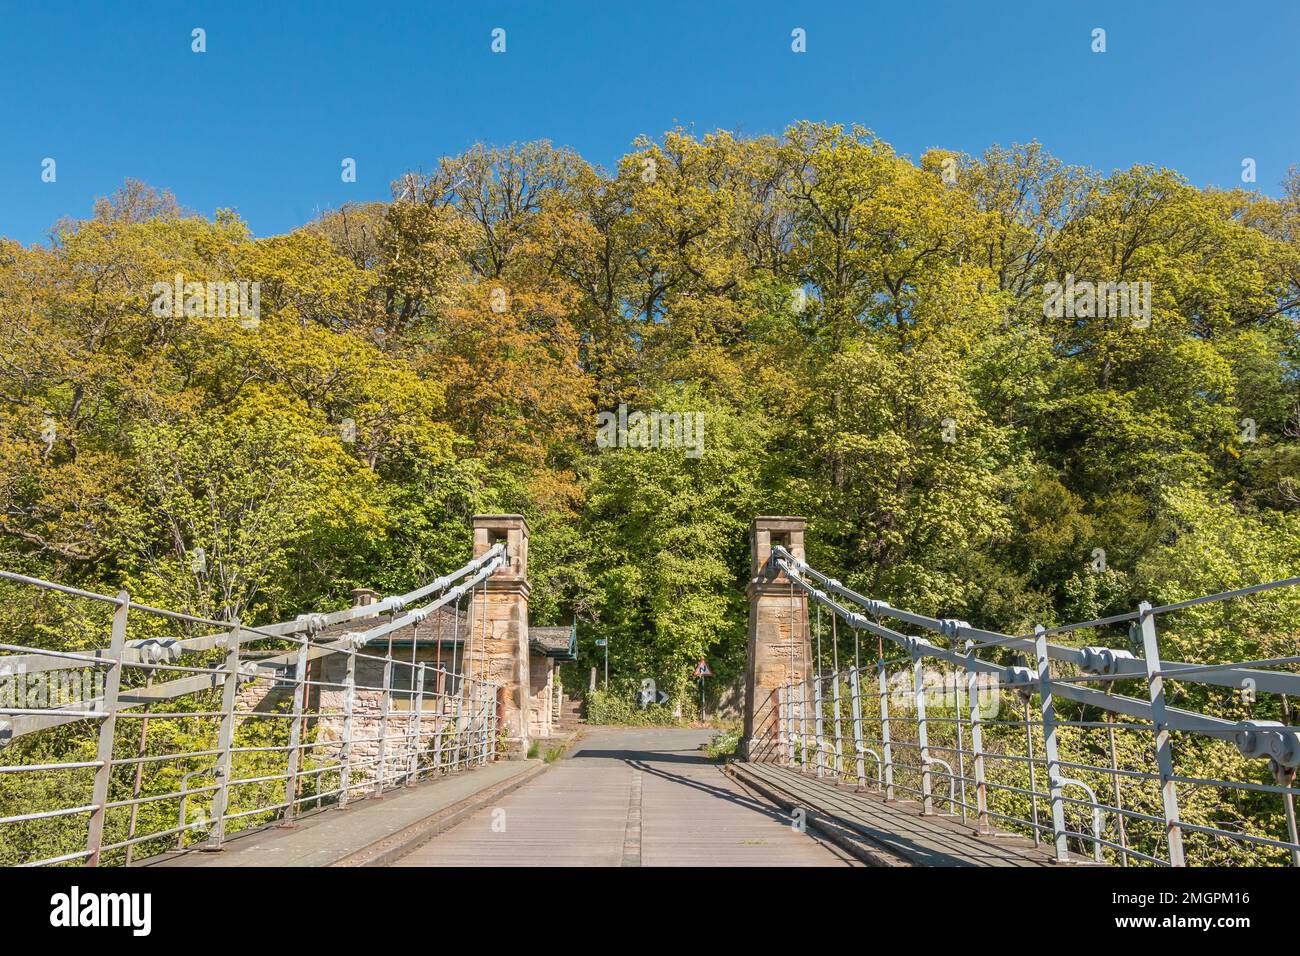 The Grade II* listed and scheduled ancient monument of Whorlton Suspension bridge over the River Tees, County Durham, UK Stock Photo